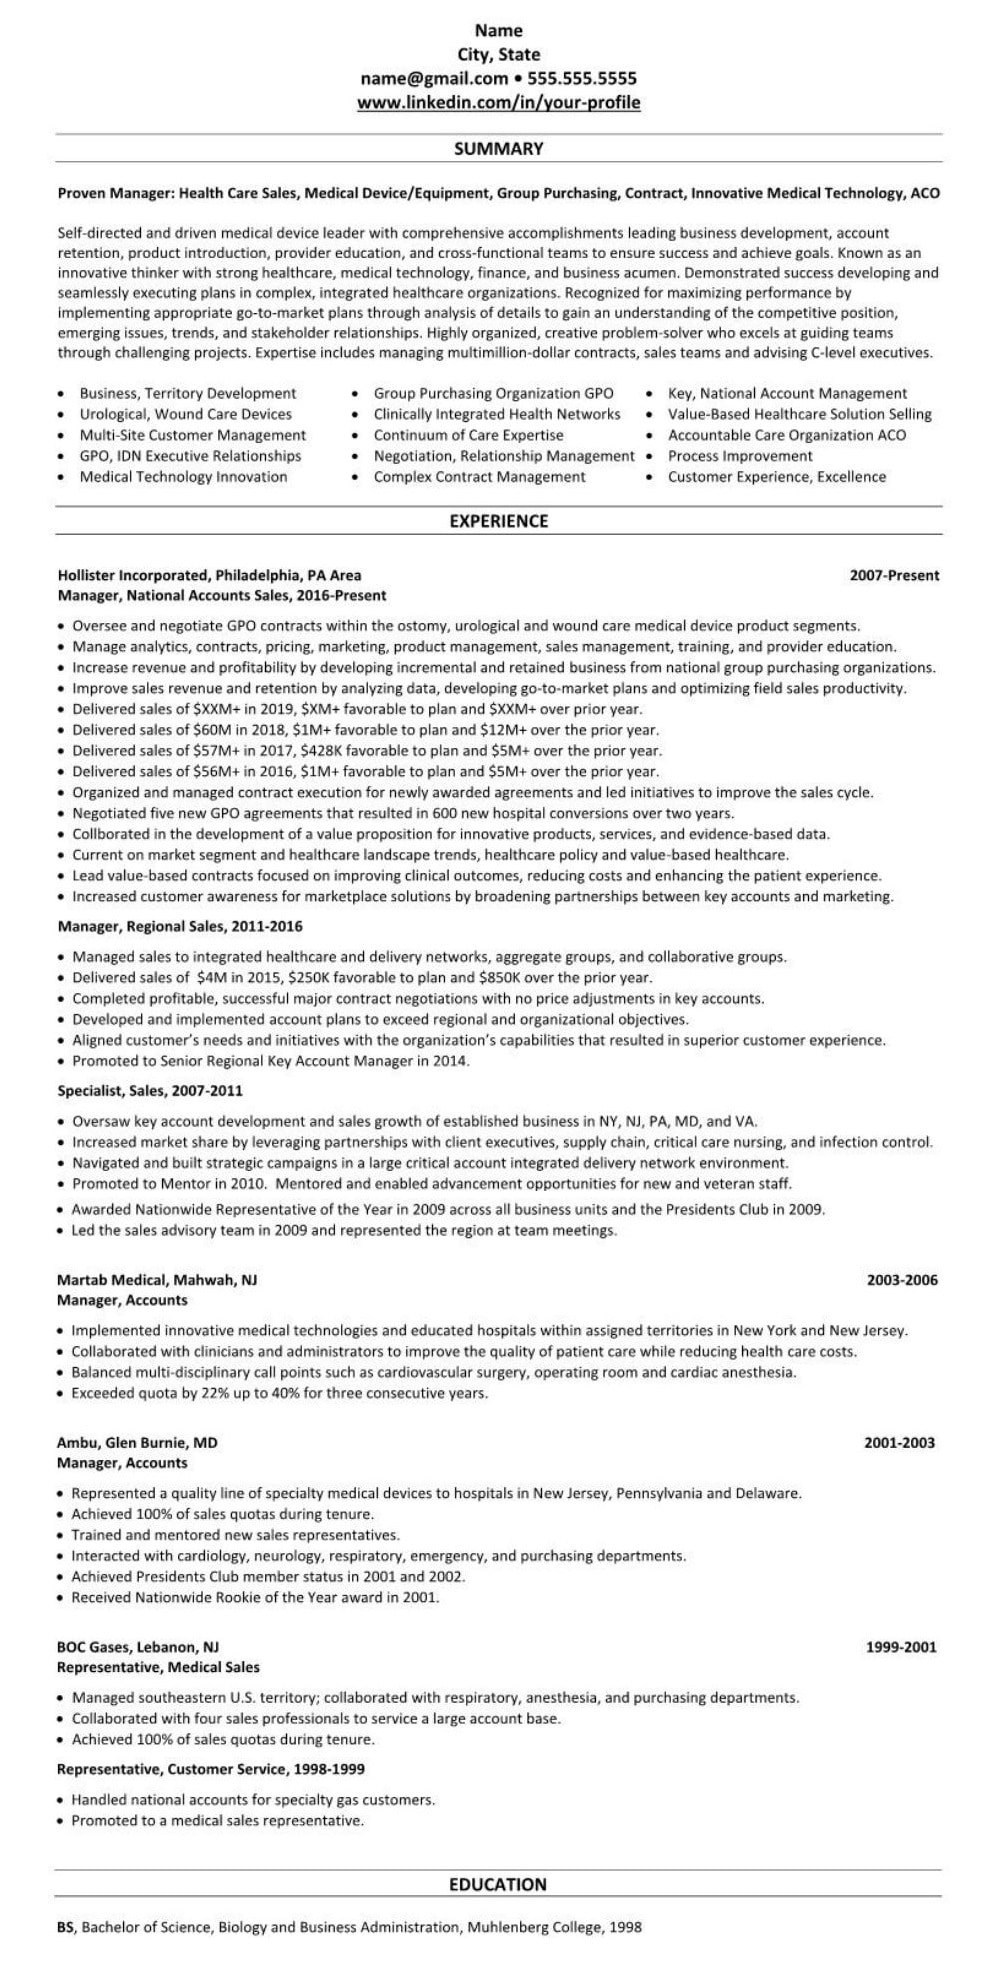 professional executive resume example medical device sales 2455